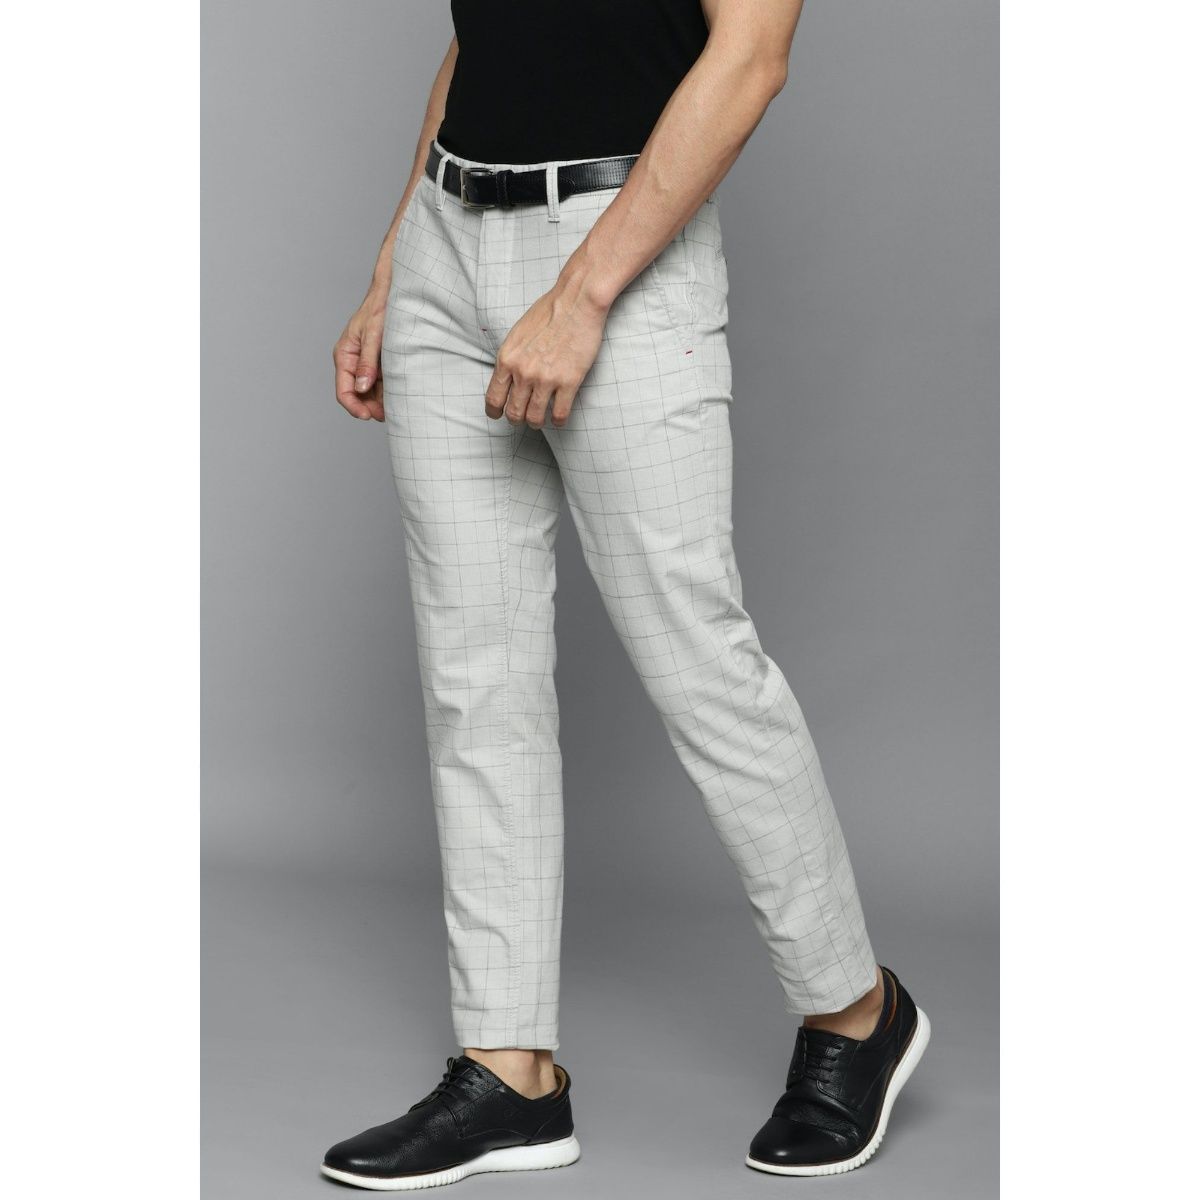 Buy LP Jeans By Louis Philippe Men's Slim Fit Casual Trousers  (LRTFCSLFB95368_Khaki_34W x 34L) at Amazon.in